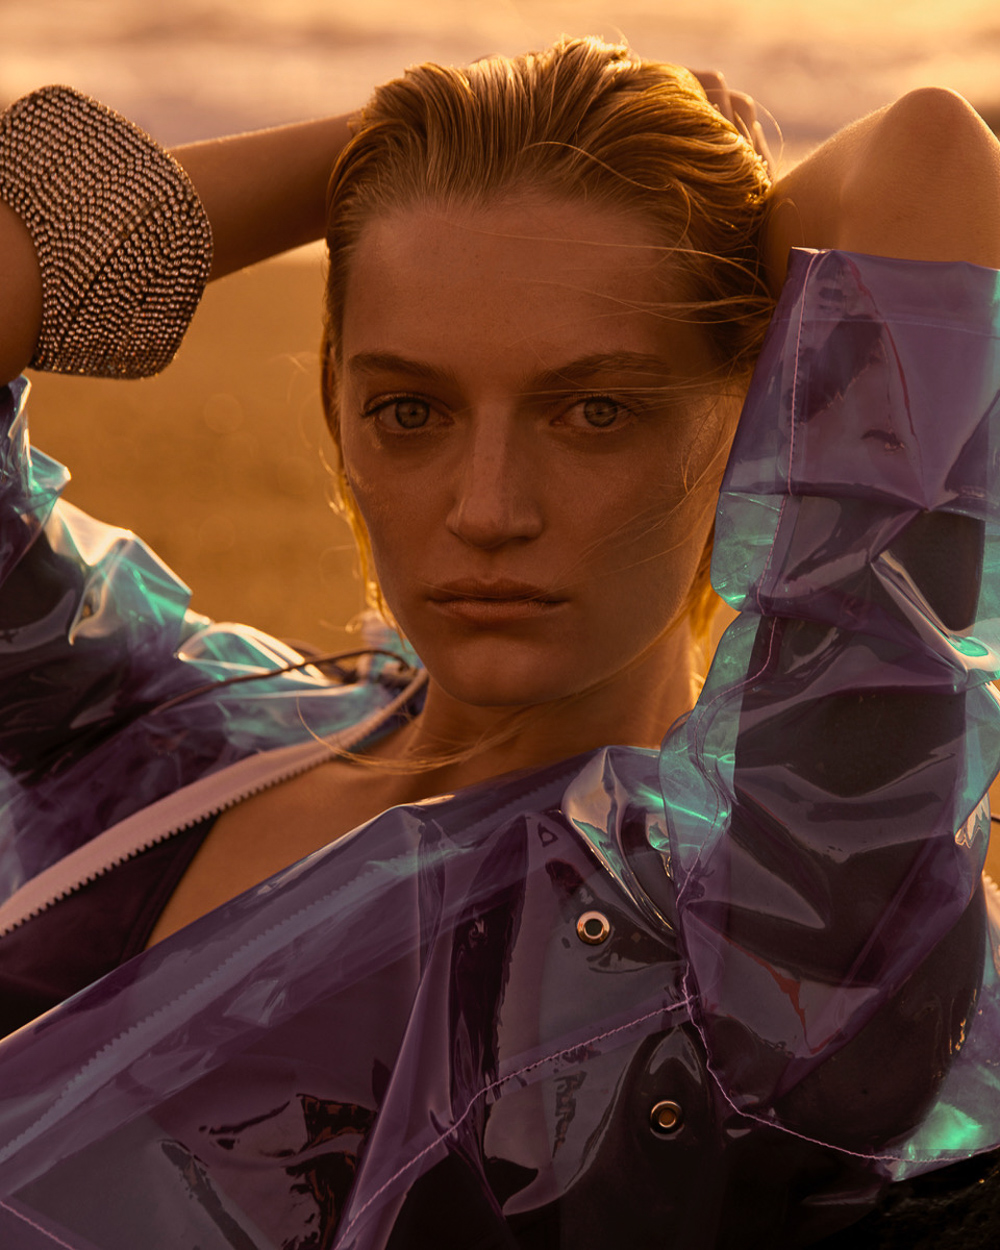 Andreas Ortner for Gala Magazine with Milena Feuerer